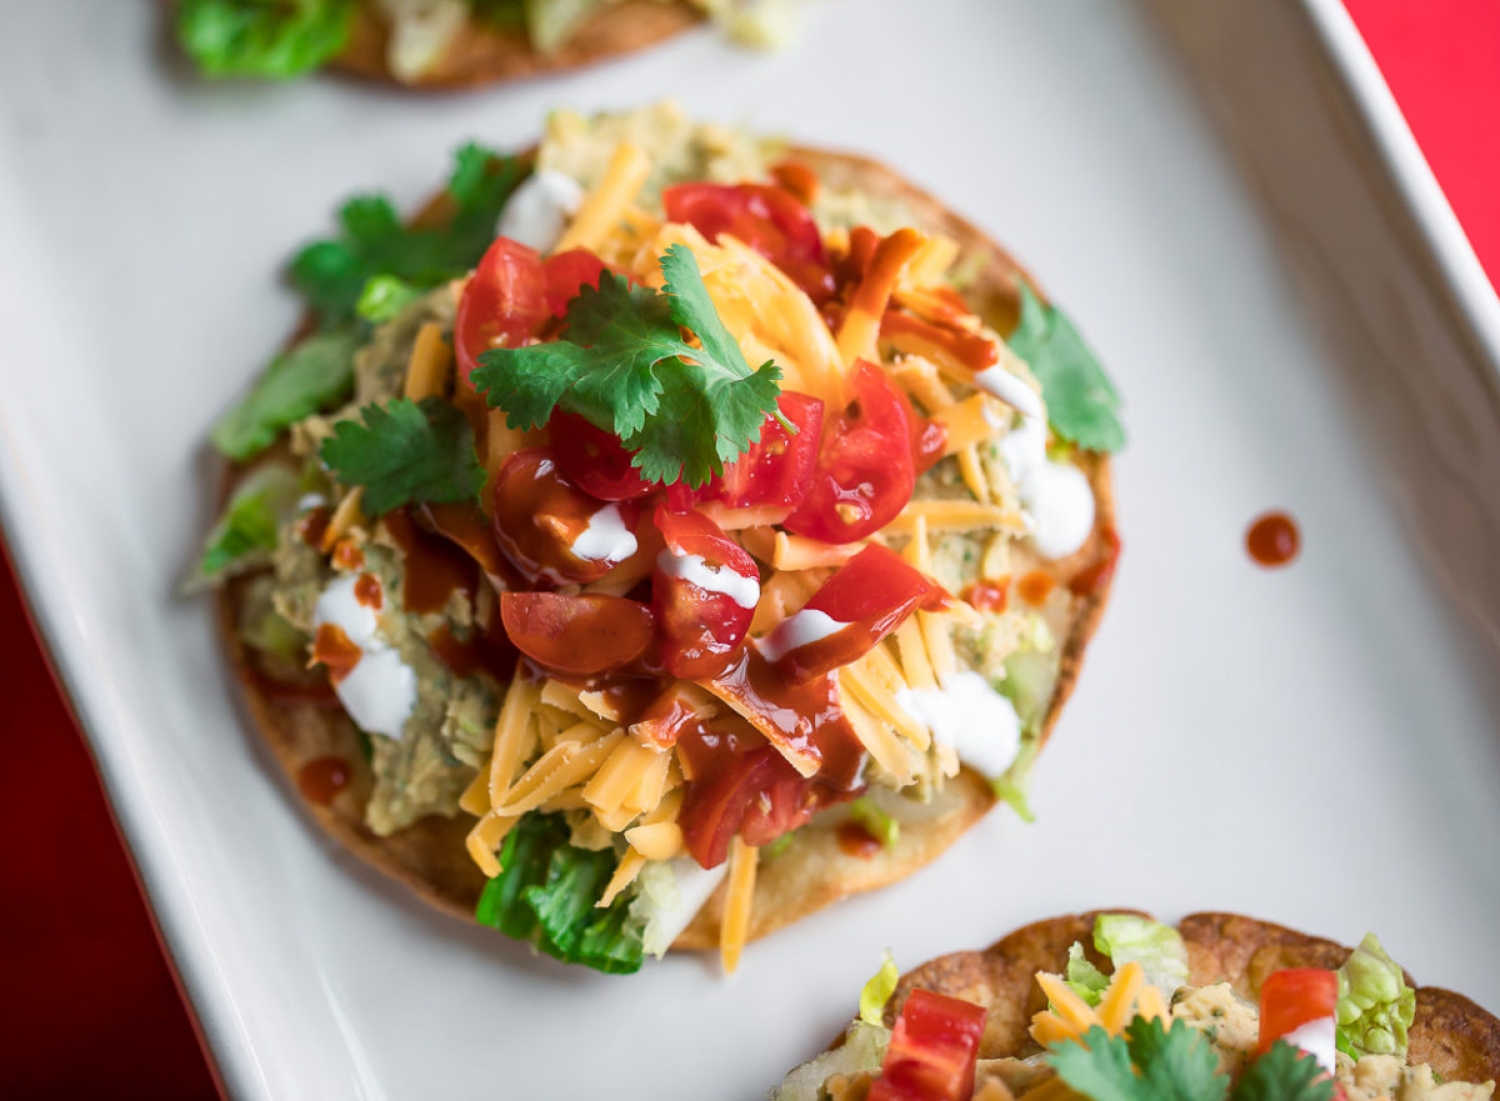 <p>Made with a budget-friendly can of white beans, these loaded tostadas would make for an excellent meat-free lunch or dinner the whole family will enjoy. Topped with all the goodness of cheese, fresh veggies, cilantro and creamy condiments, they are bursting with flavor in every bite. <a href="https://peasandcrayons.com/2020/03/white-bean-tostadas.html" rel="noopener">Get the recipe here.</a></p>